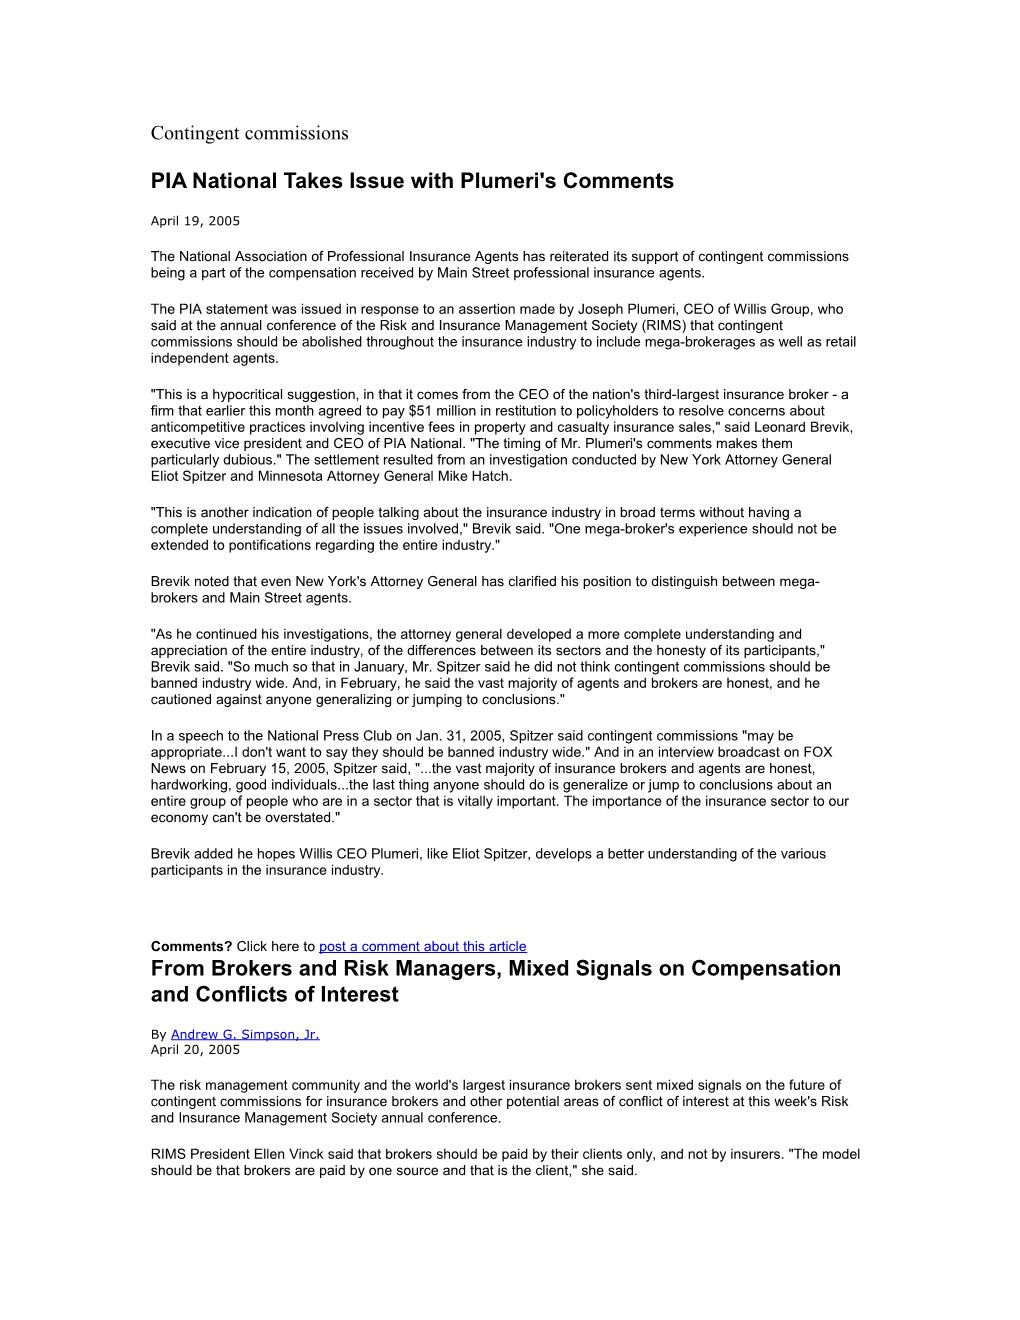 PIA National Takes Issue with Plumeri's Comments